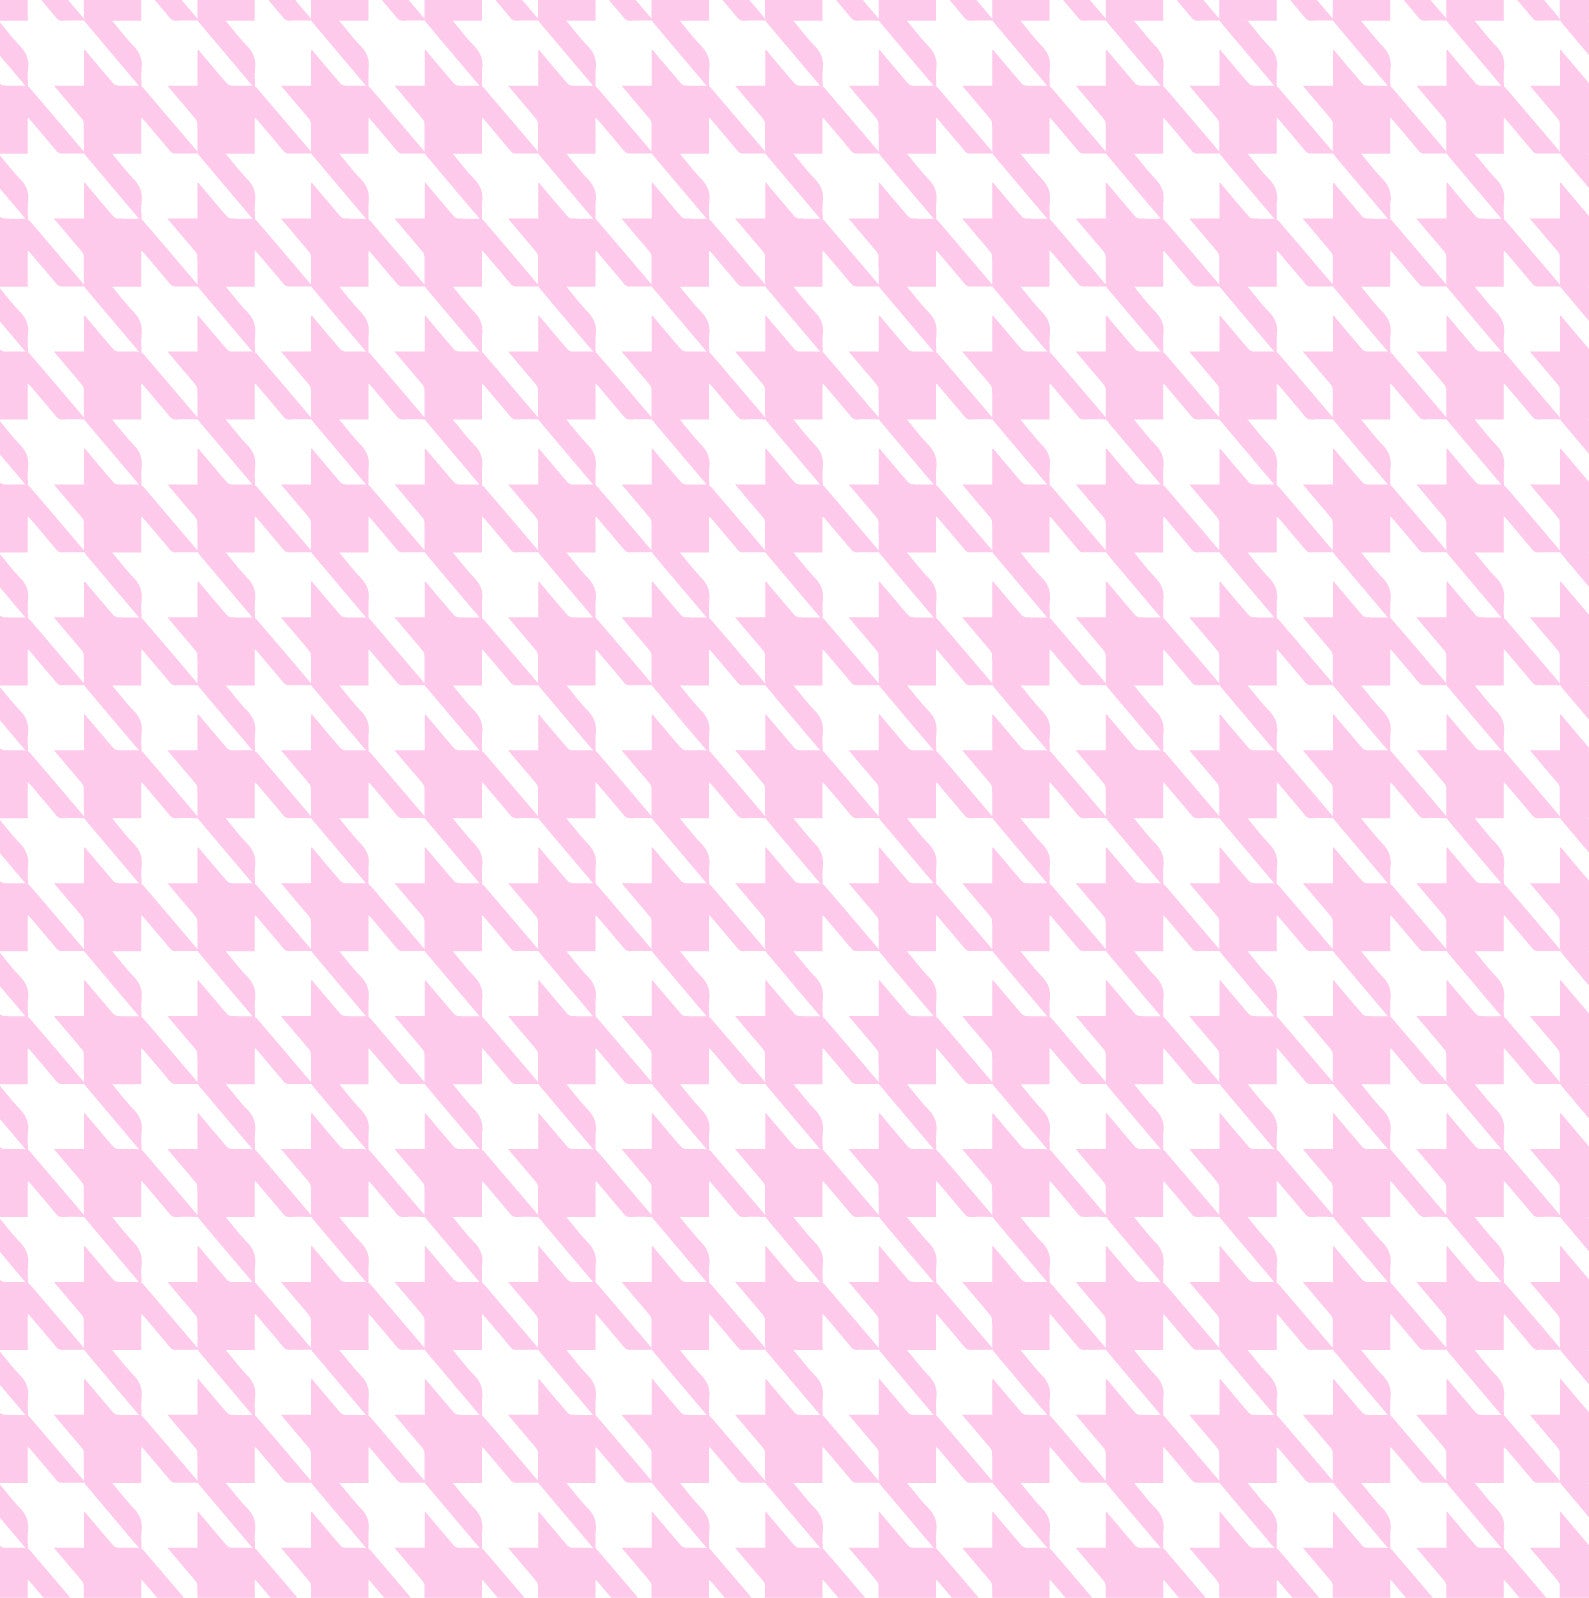 Baby Bamboo Pink Houndstooth